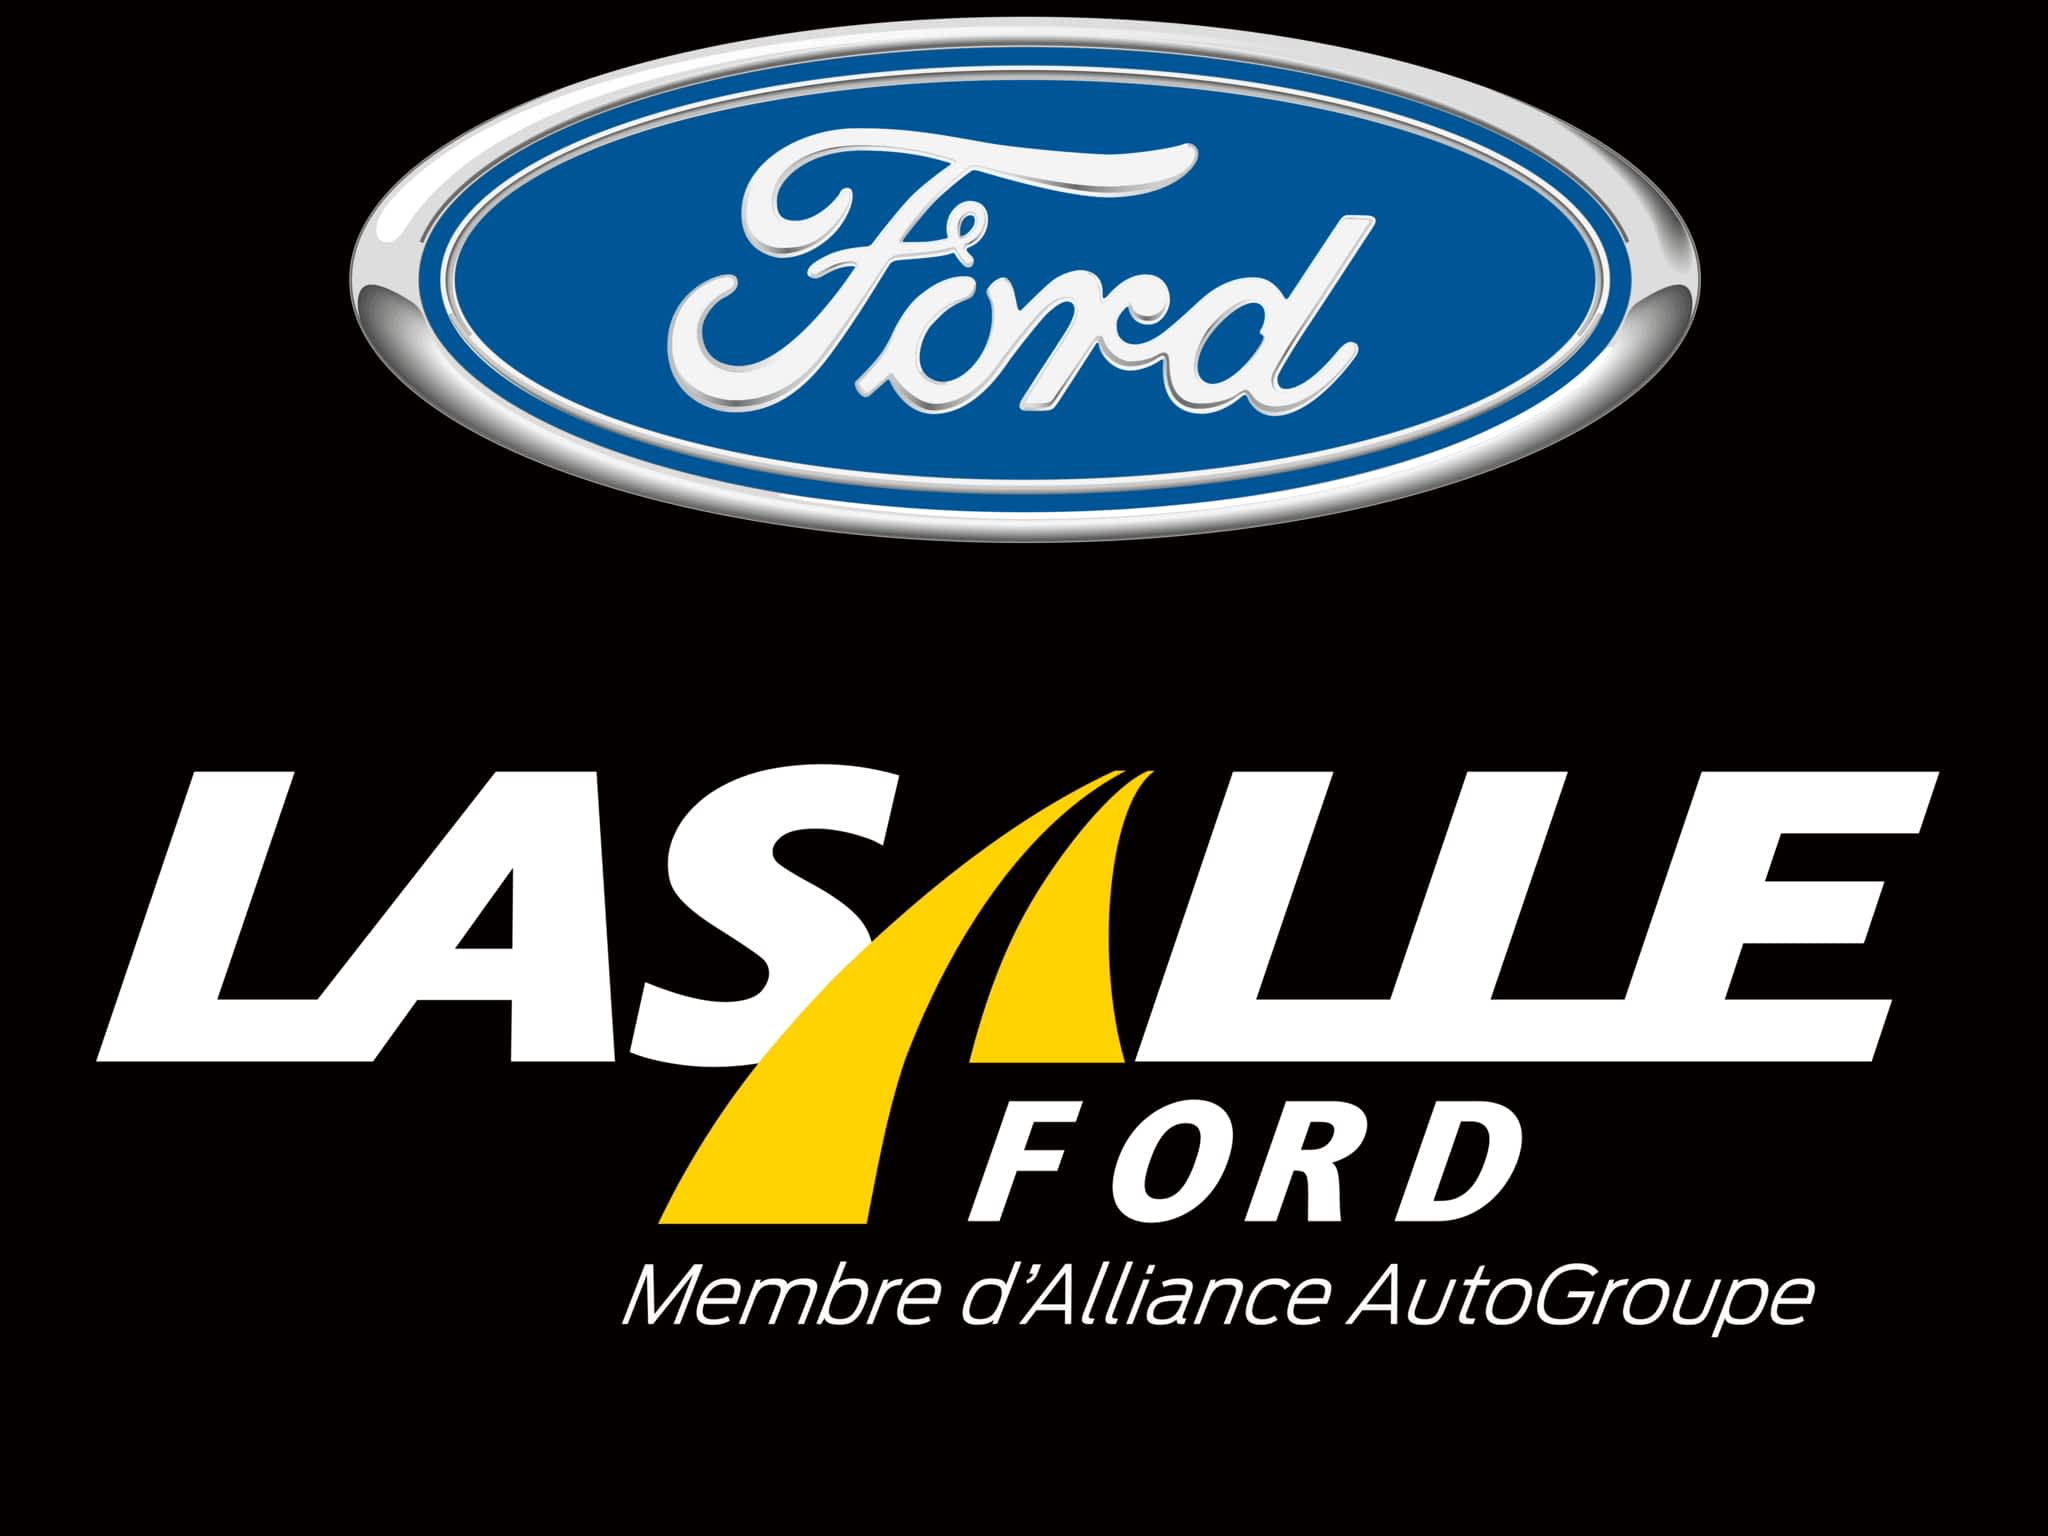 photo LaSalle Ford